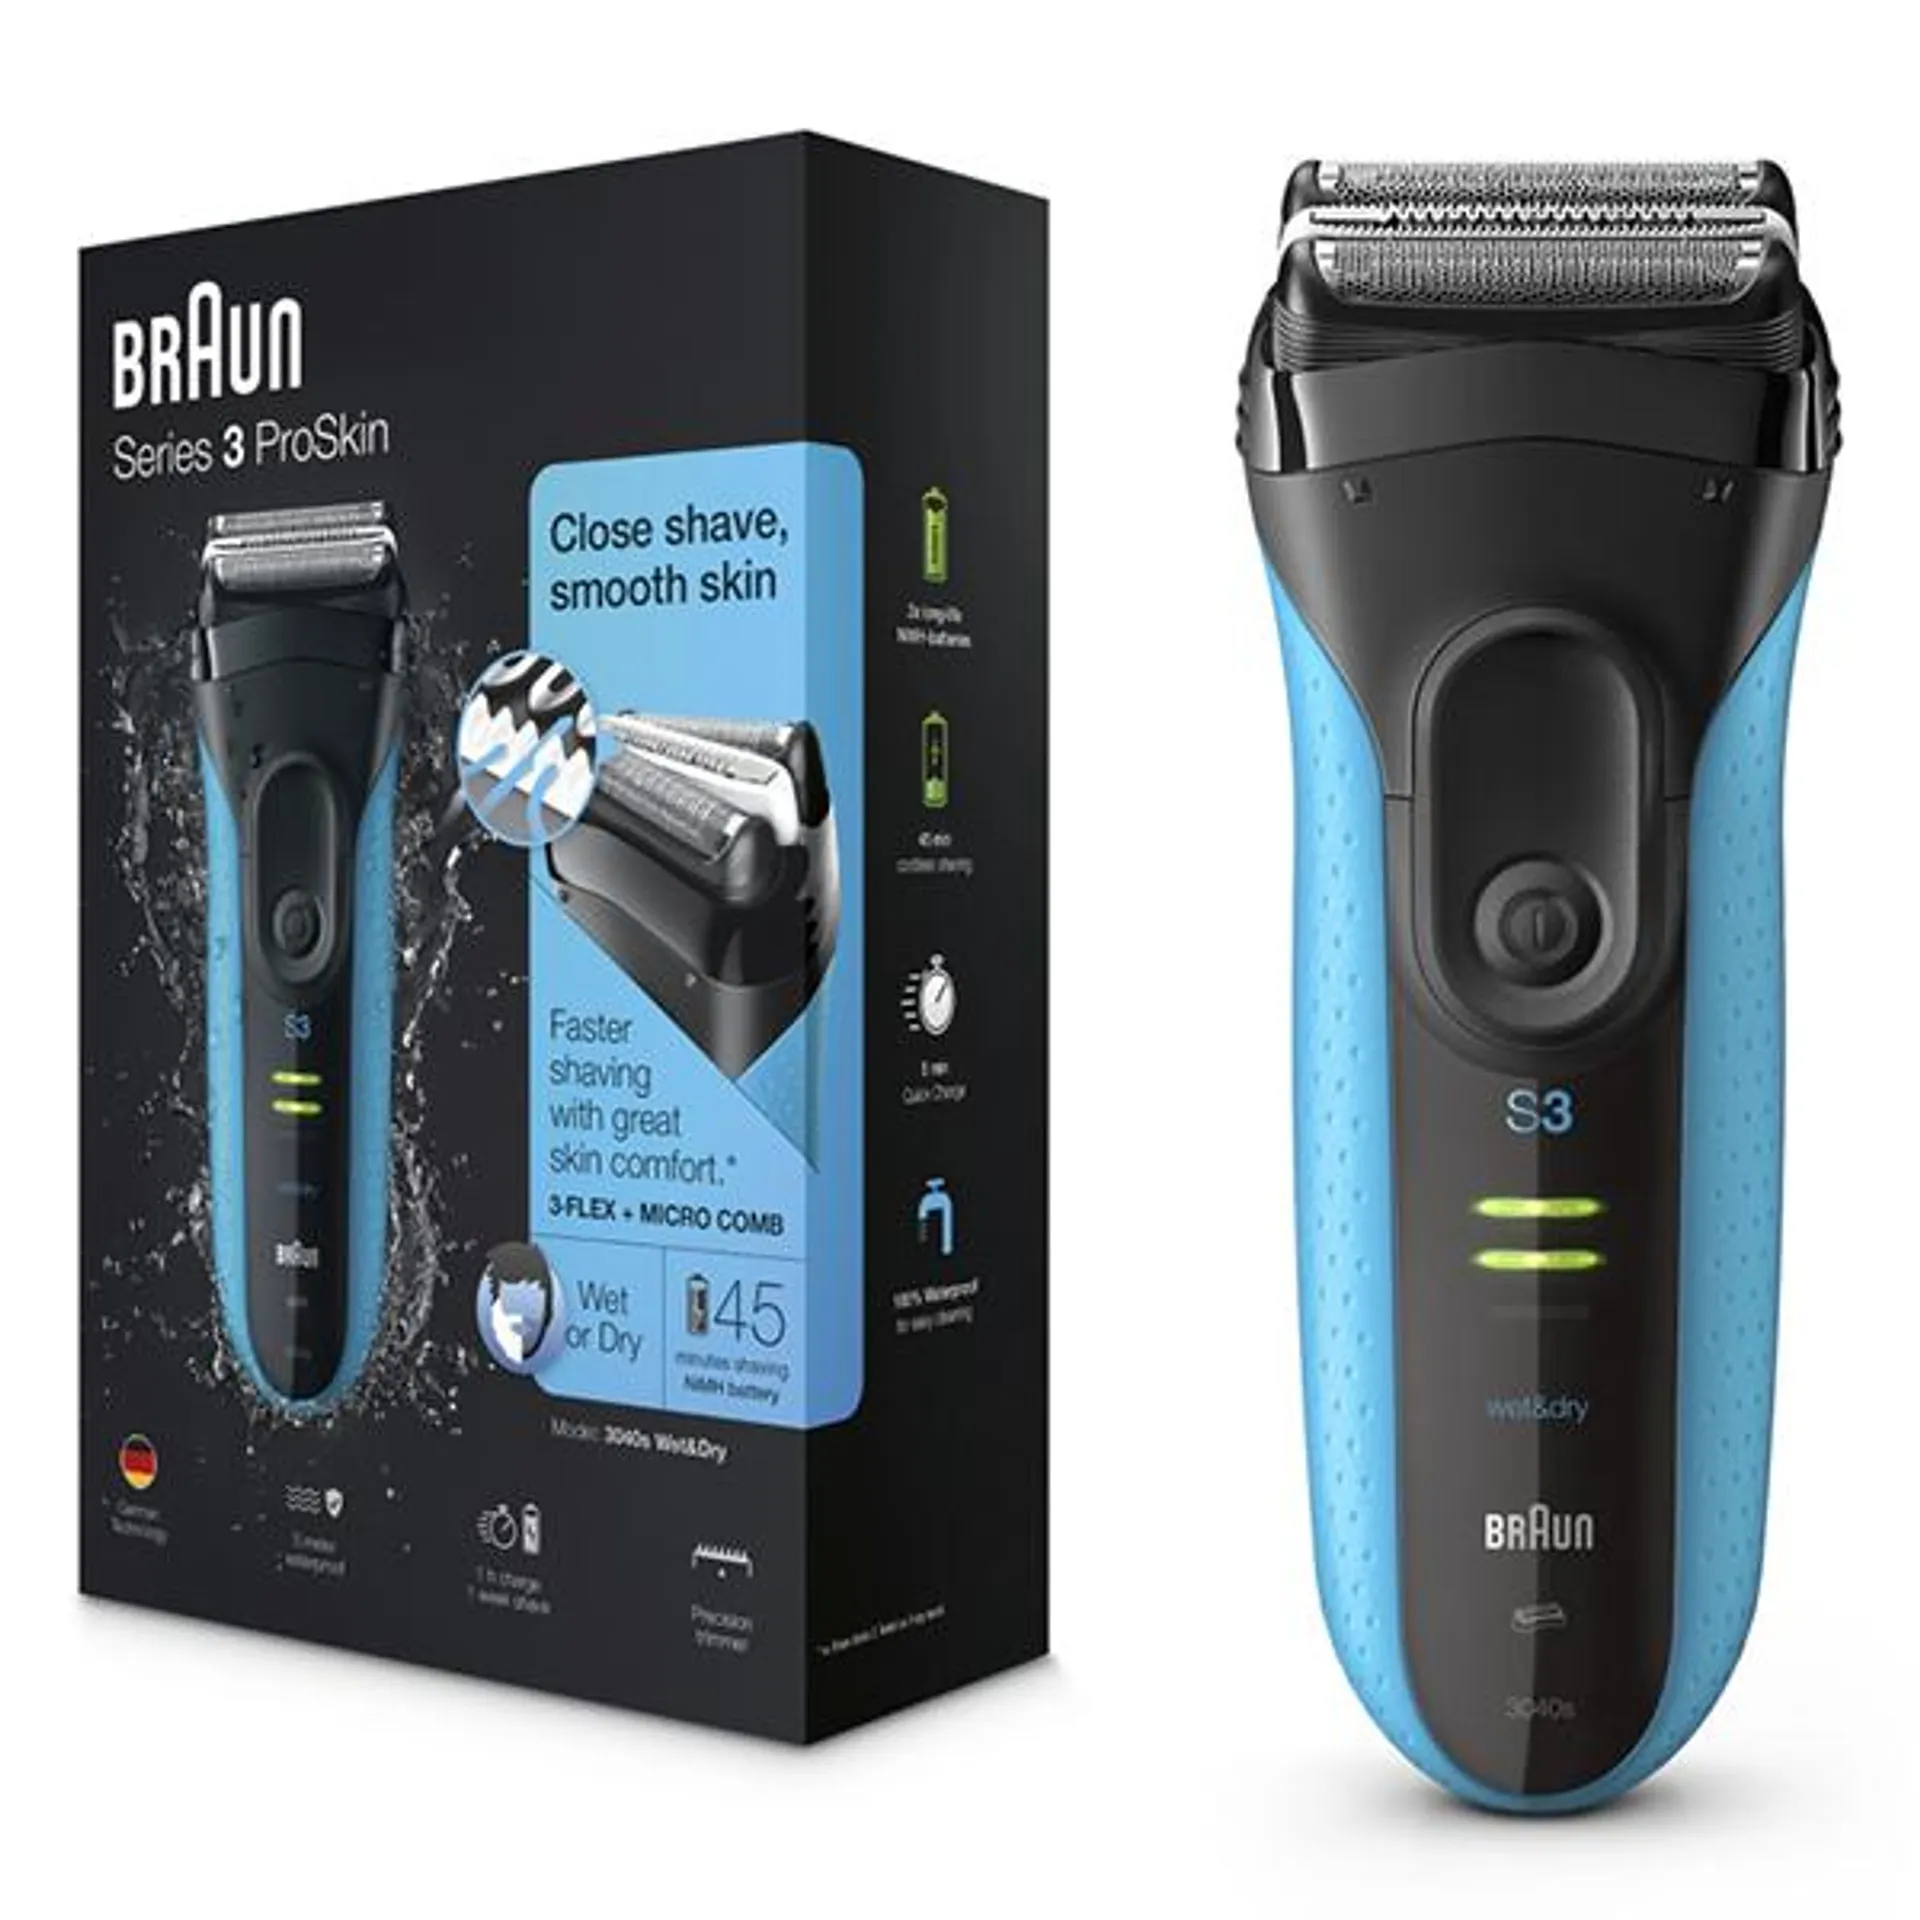 Braun Series 3 ProSkin 3040s Wet and Dry Electric Shaver - Black/Blue